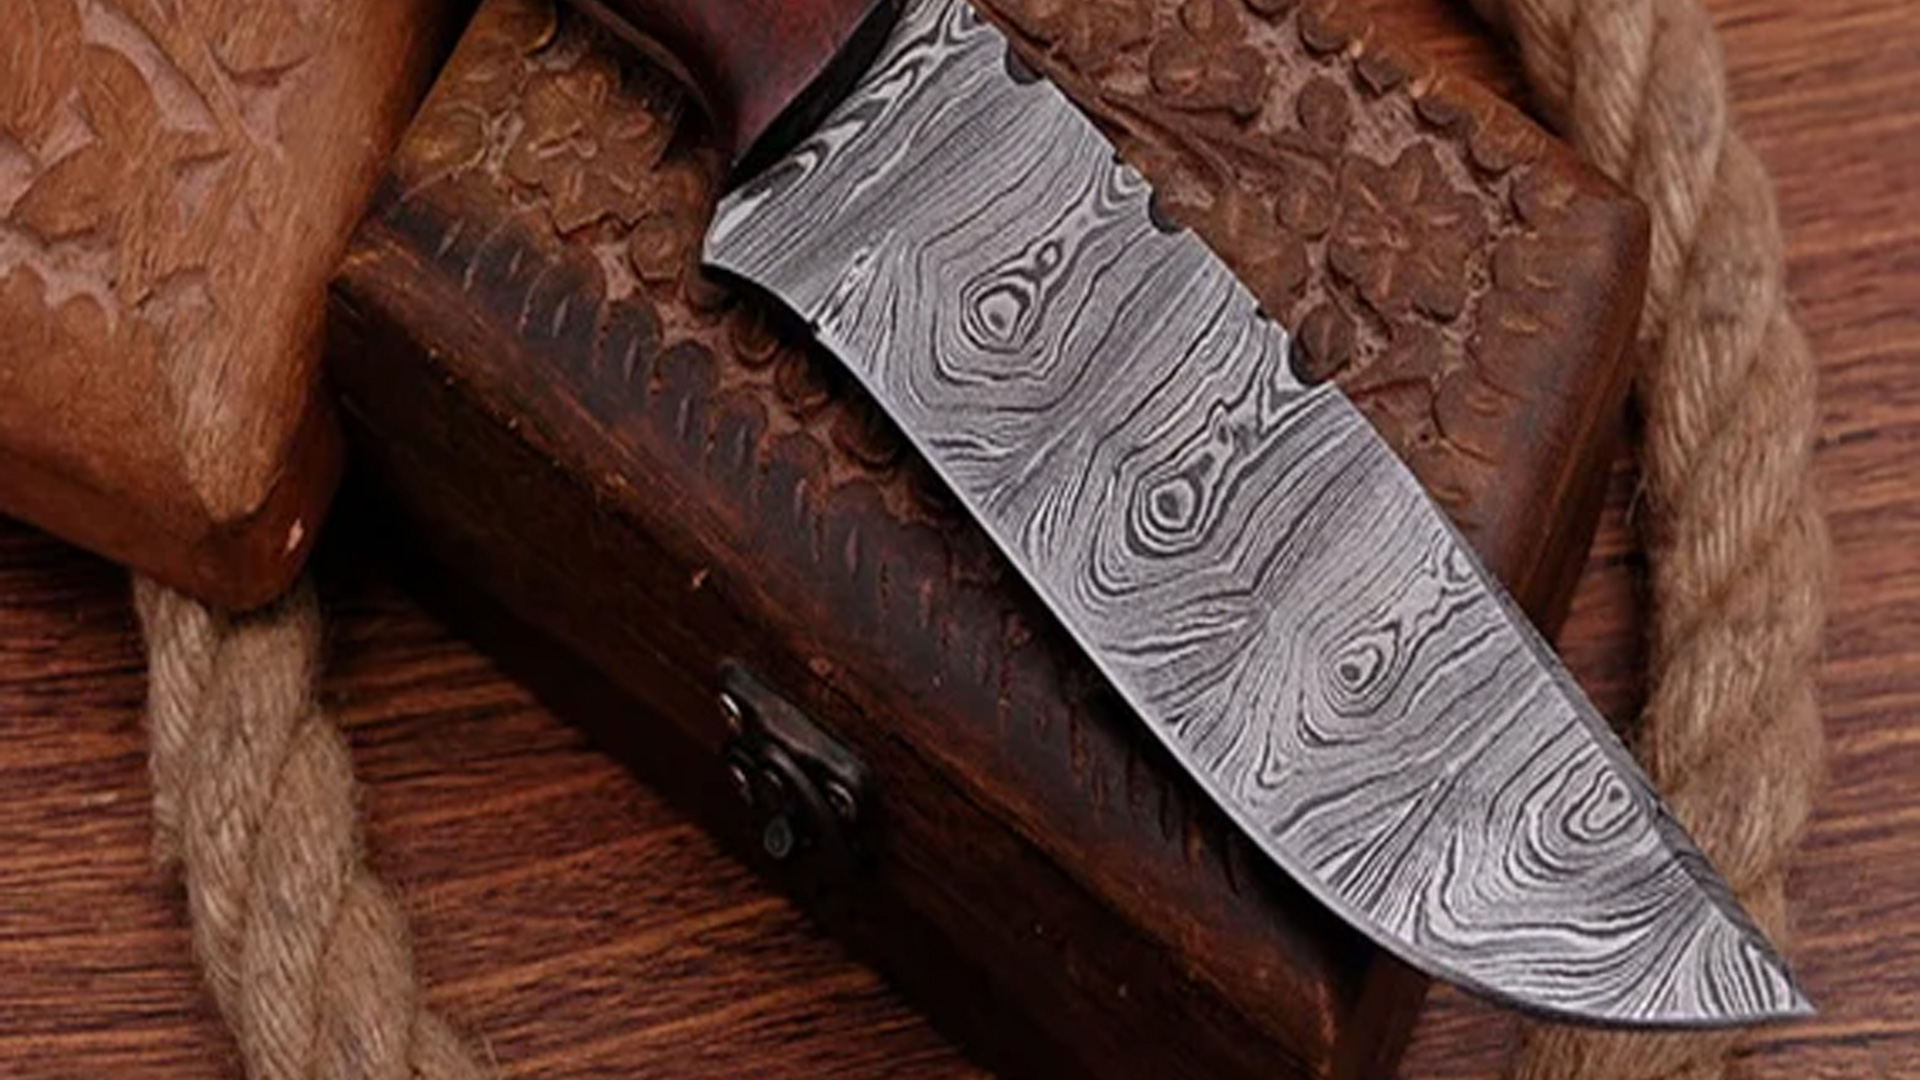 Primary Uses of Damascus Knives